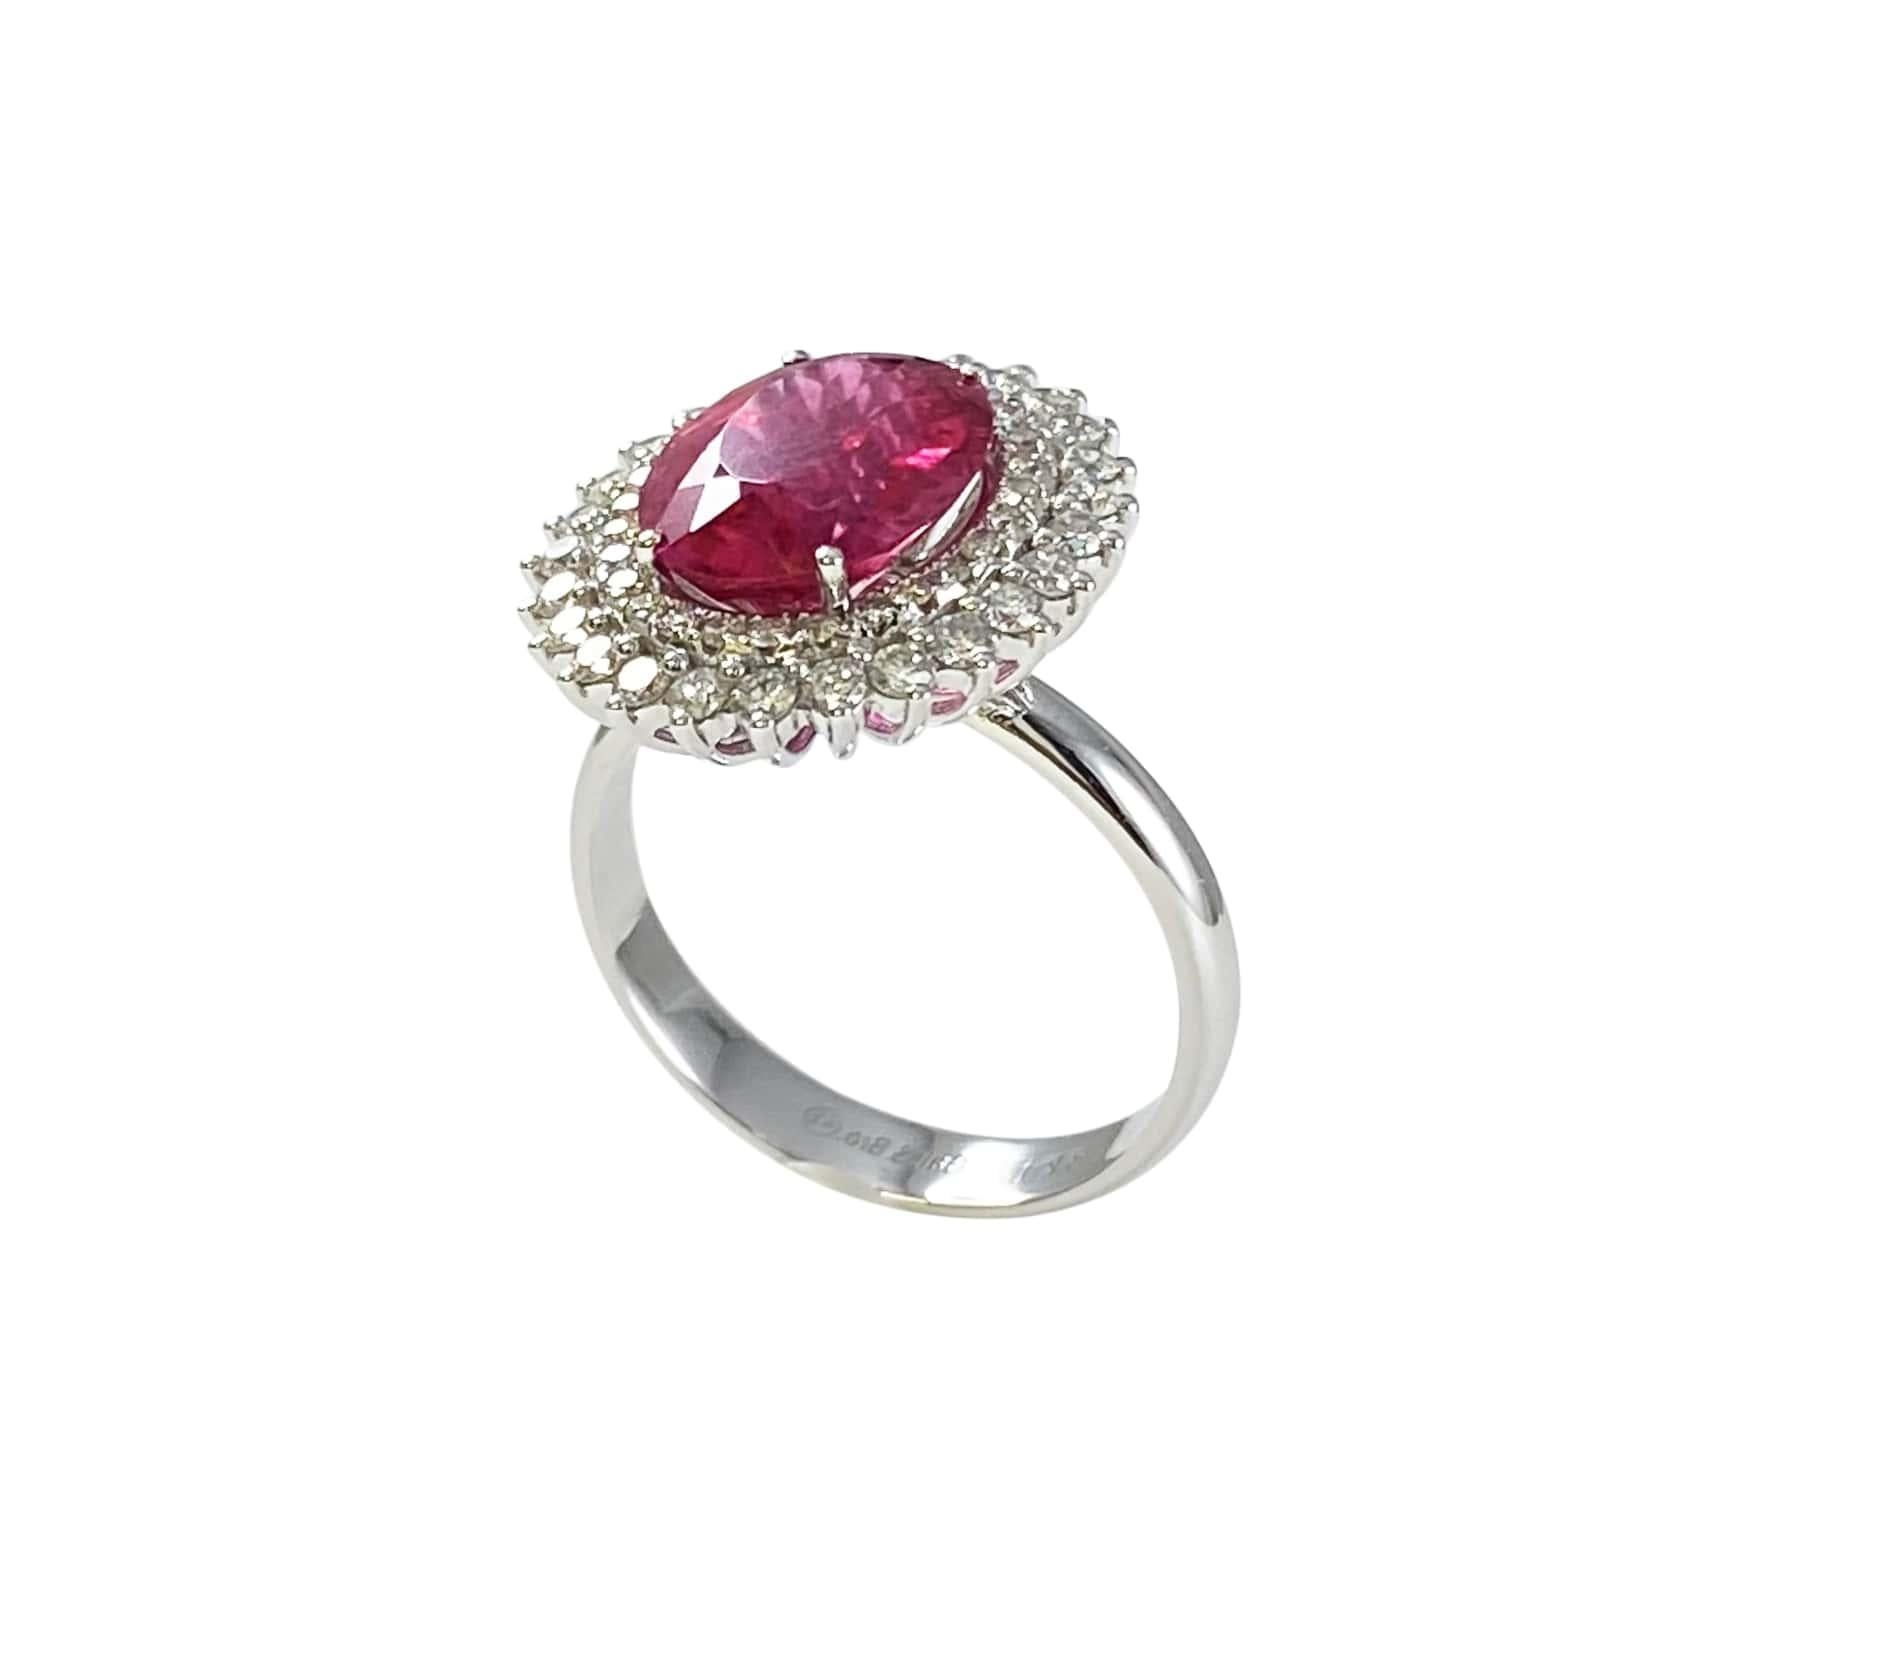 Rubellite Pink Tourmaline Double Diamond Halo Sun Ray 18 Karat White Gold Ring
18 Karat White Gold
3.00 CT Pink Tourmaline/Rubellite
1.50 CT Diamond of G Color/VS Clarity
Size 7, Resizable upon request 

Important Information:
Please note that this